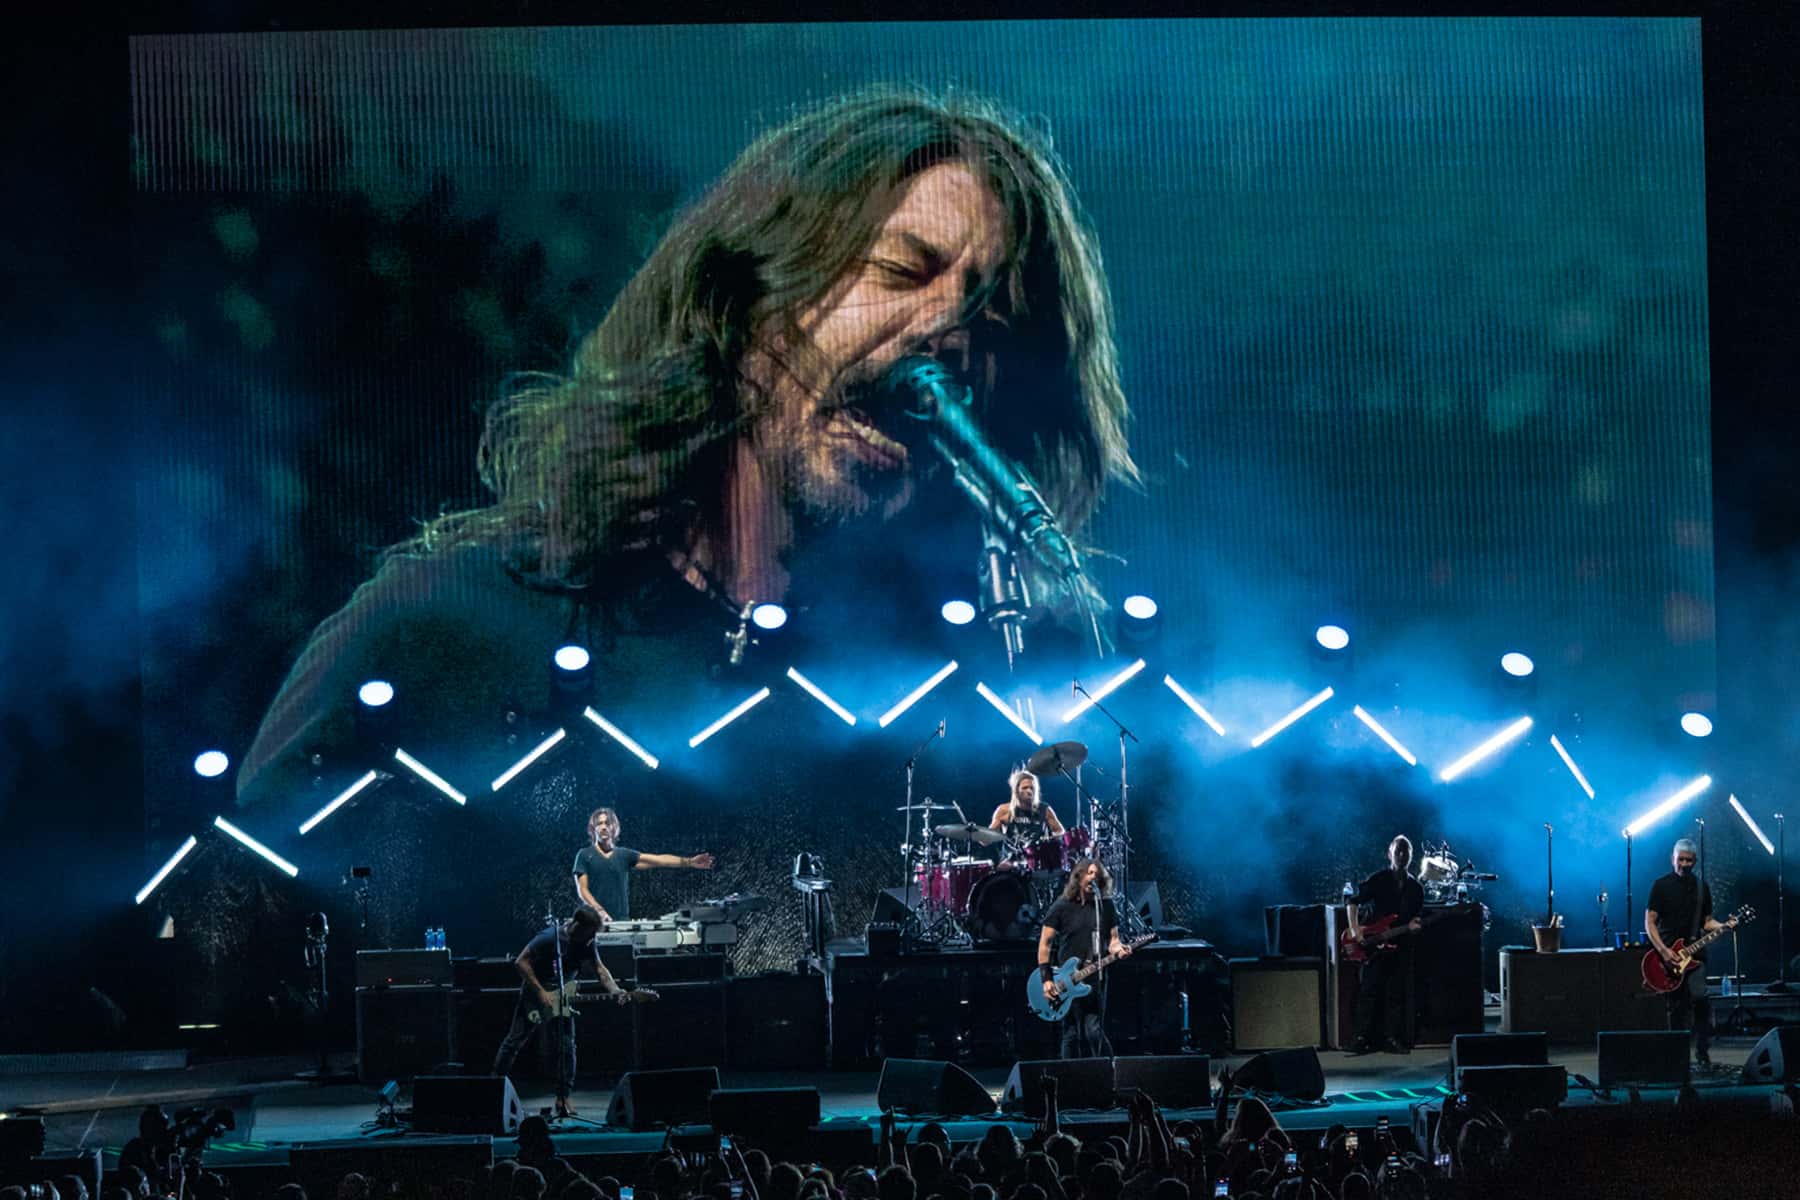 Live music returns Foo Fighters perform first major concert in